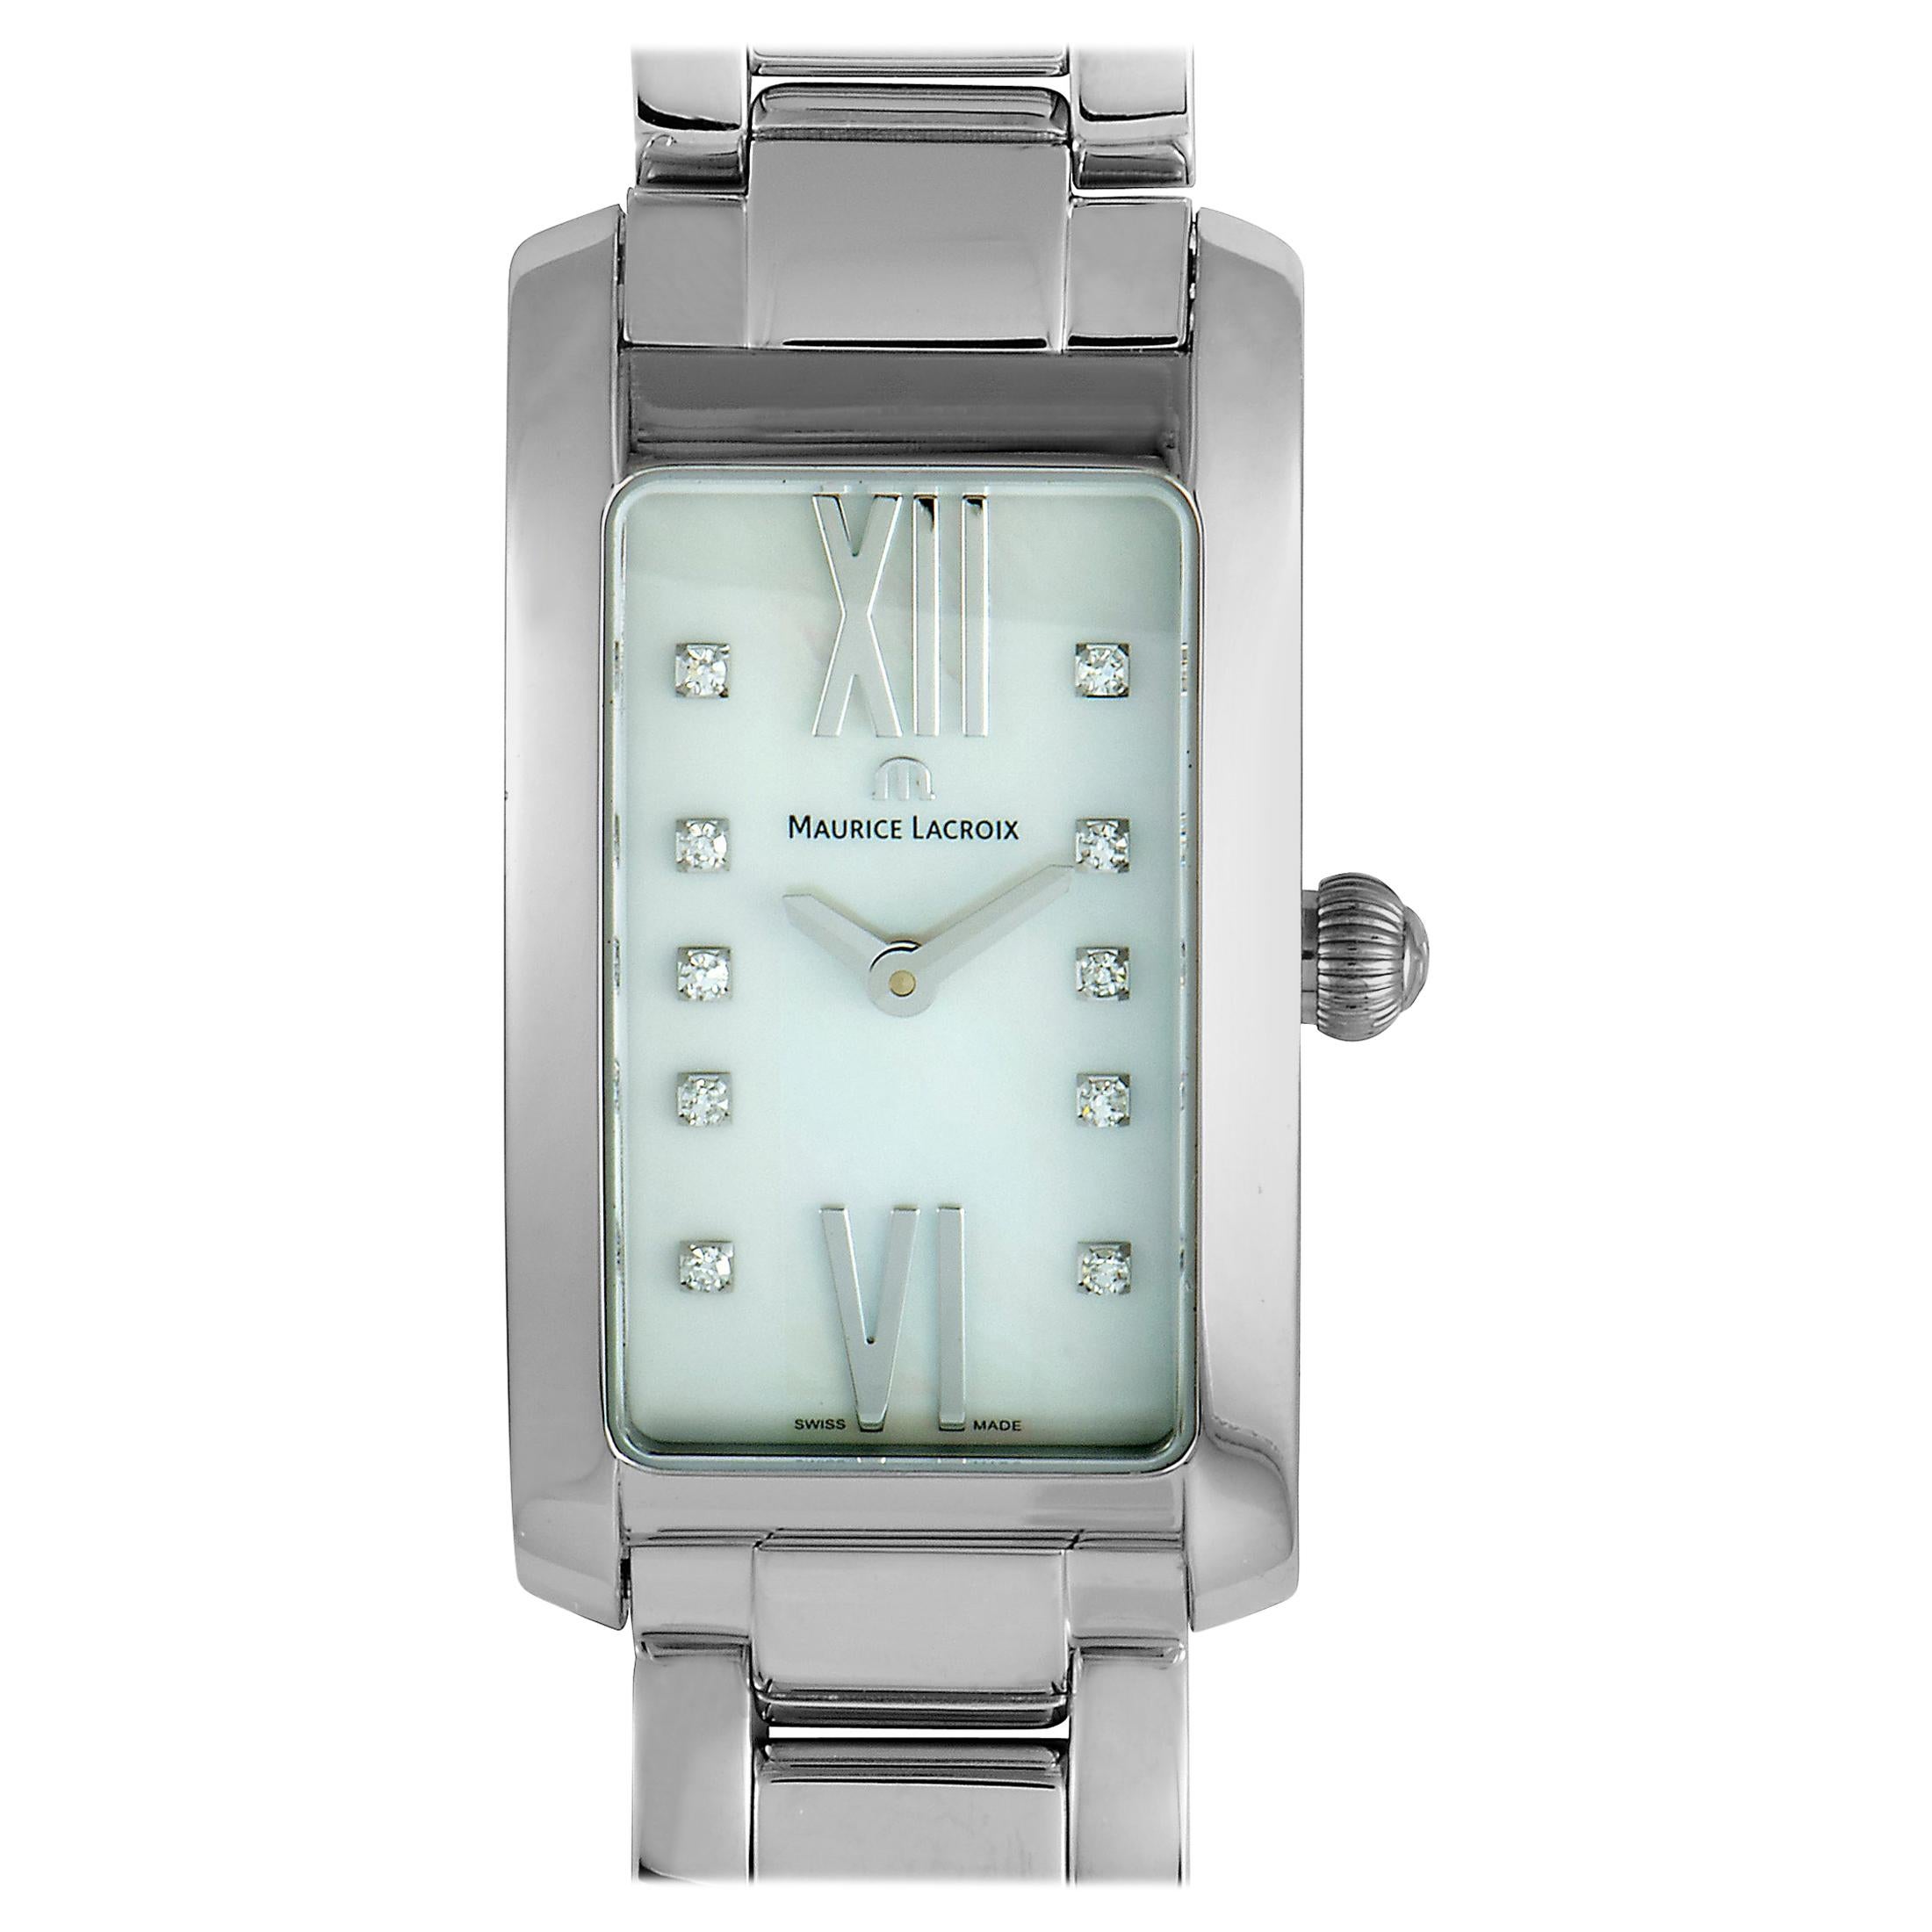 Maurice Lacroix Fiaba Watch FA2164-SS002-170